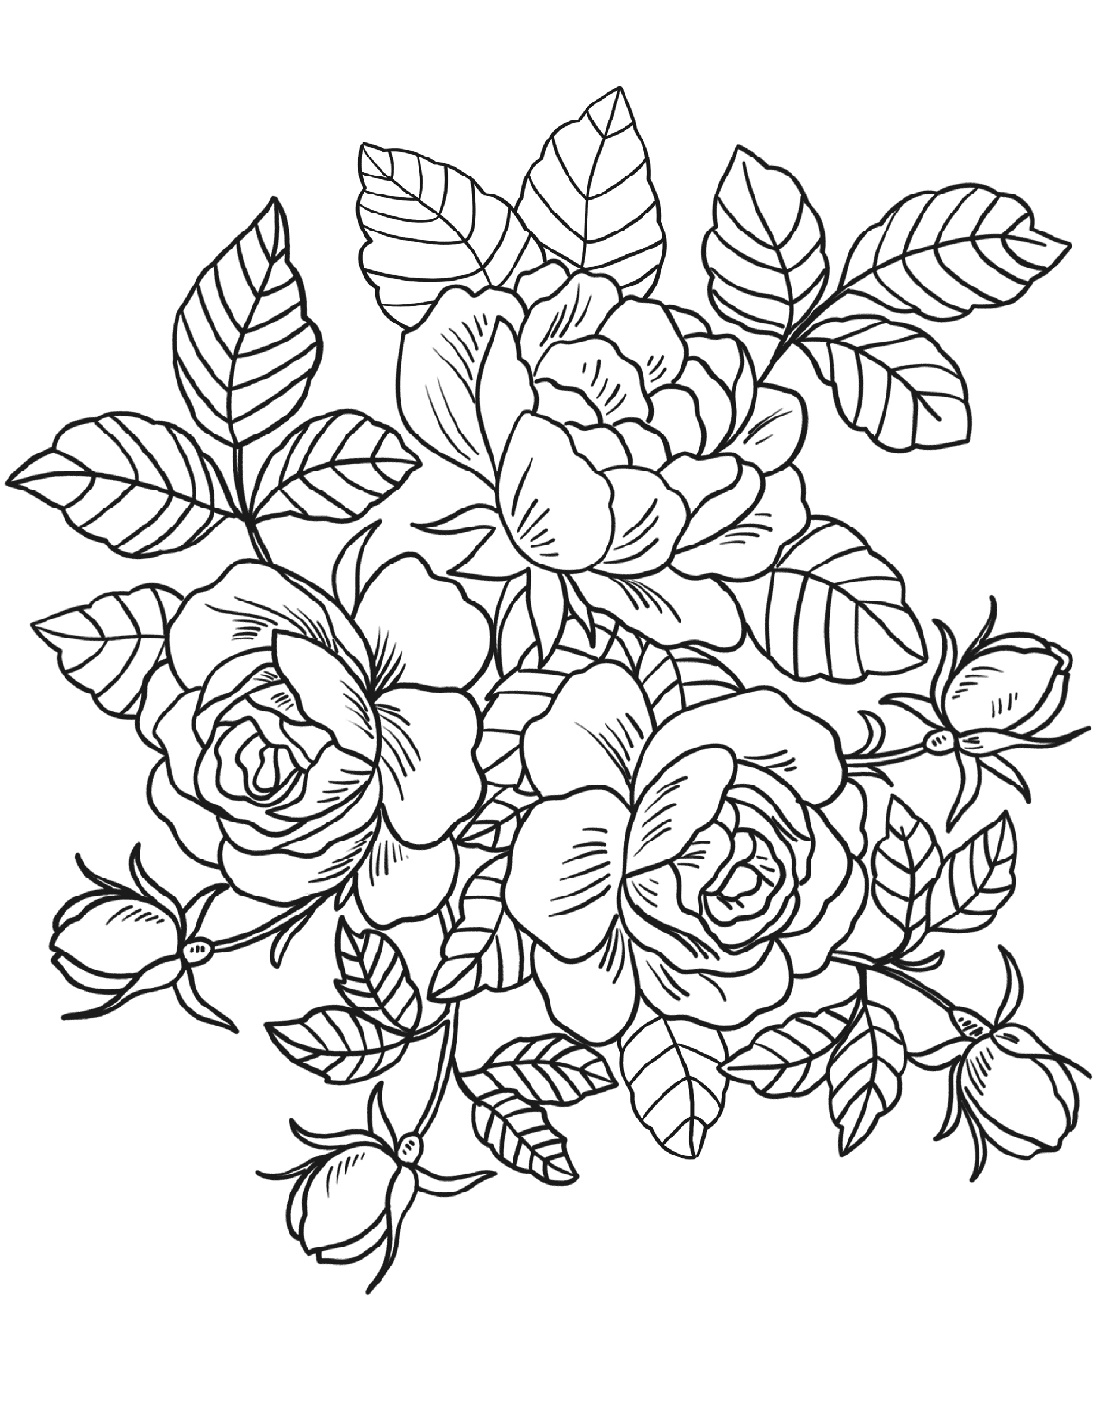 Rose Coloring Pages To Print